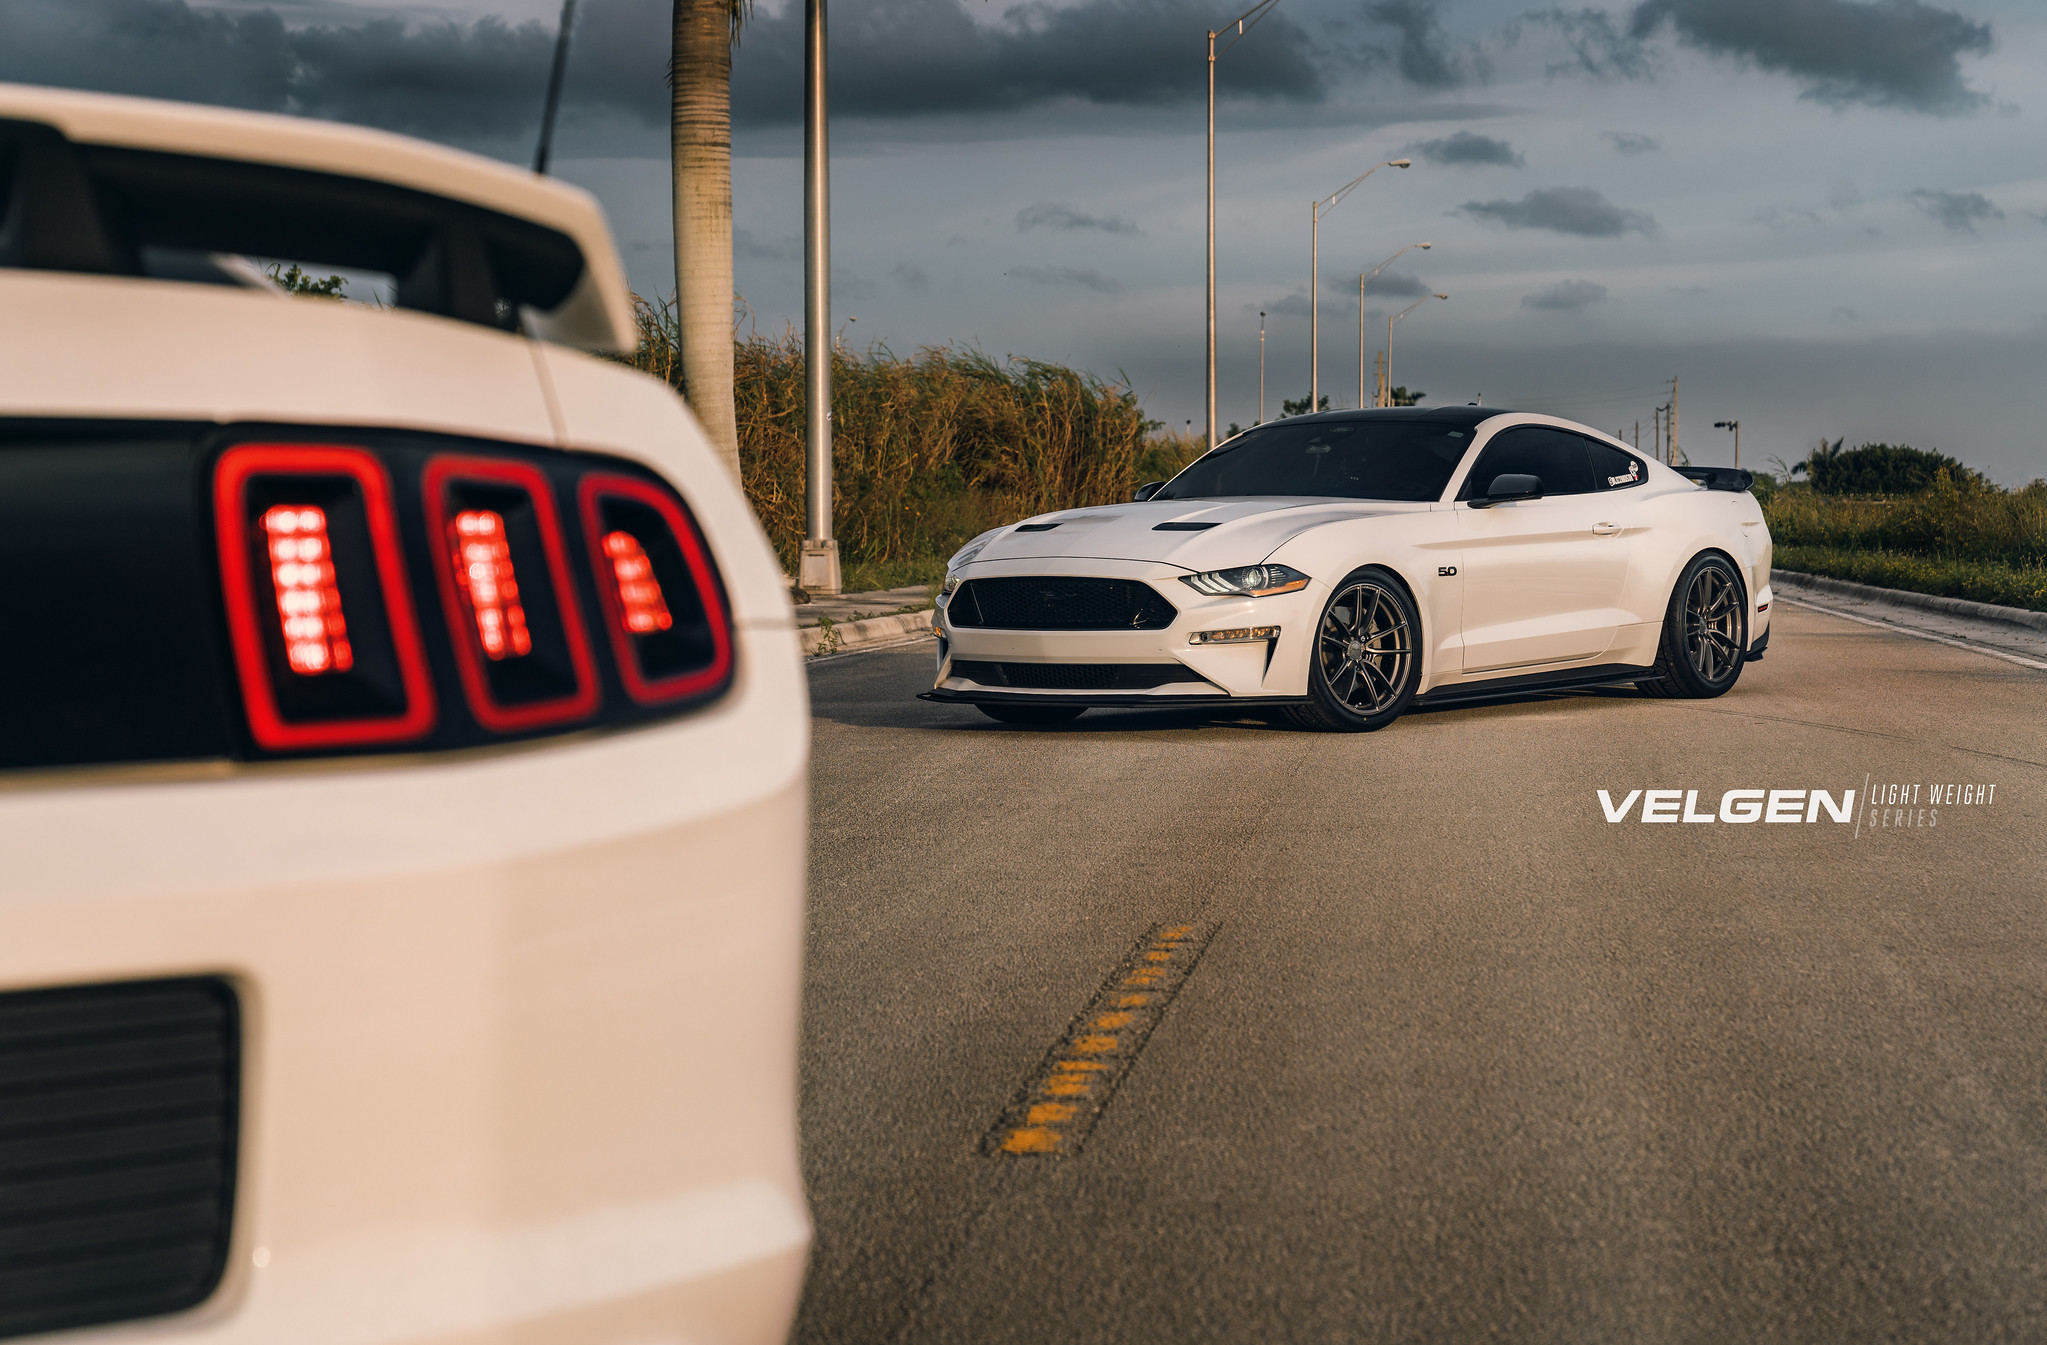 S650 Mustang 19" 20" Velgen Flow Forged Concave Wheels Mustang S650 - Vibe Motorsports Official Thread 52576254018_da5a976881_k